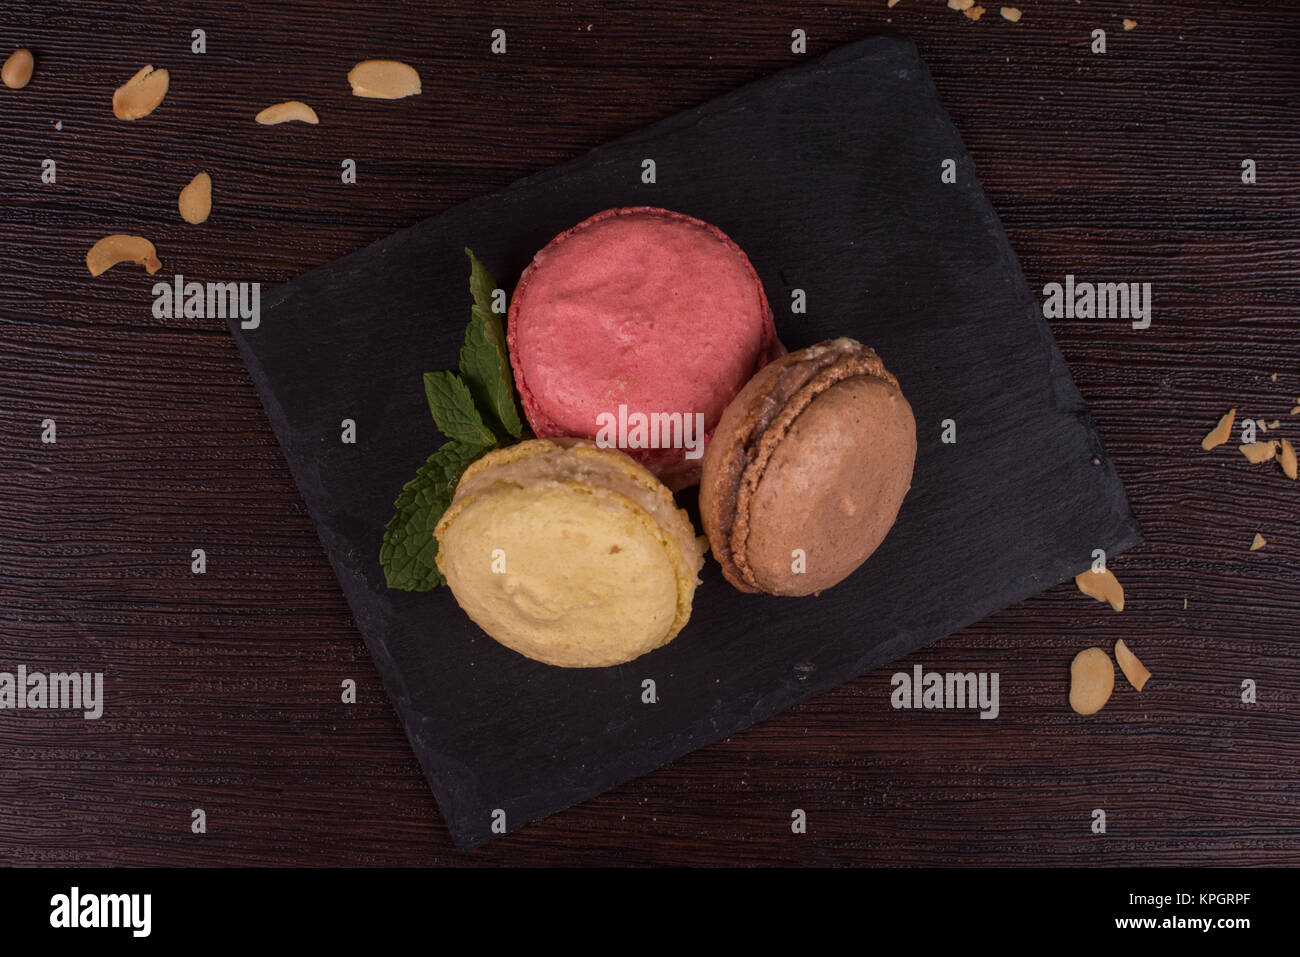 Colorful french macarons Stock Photo